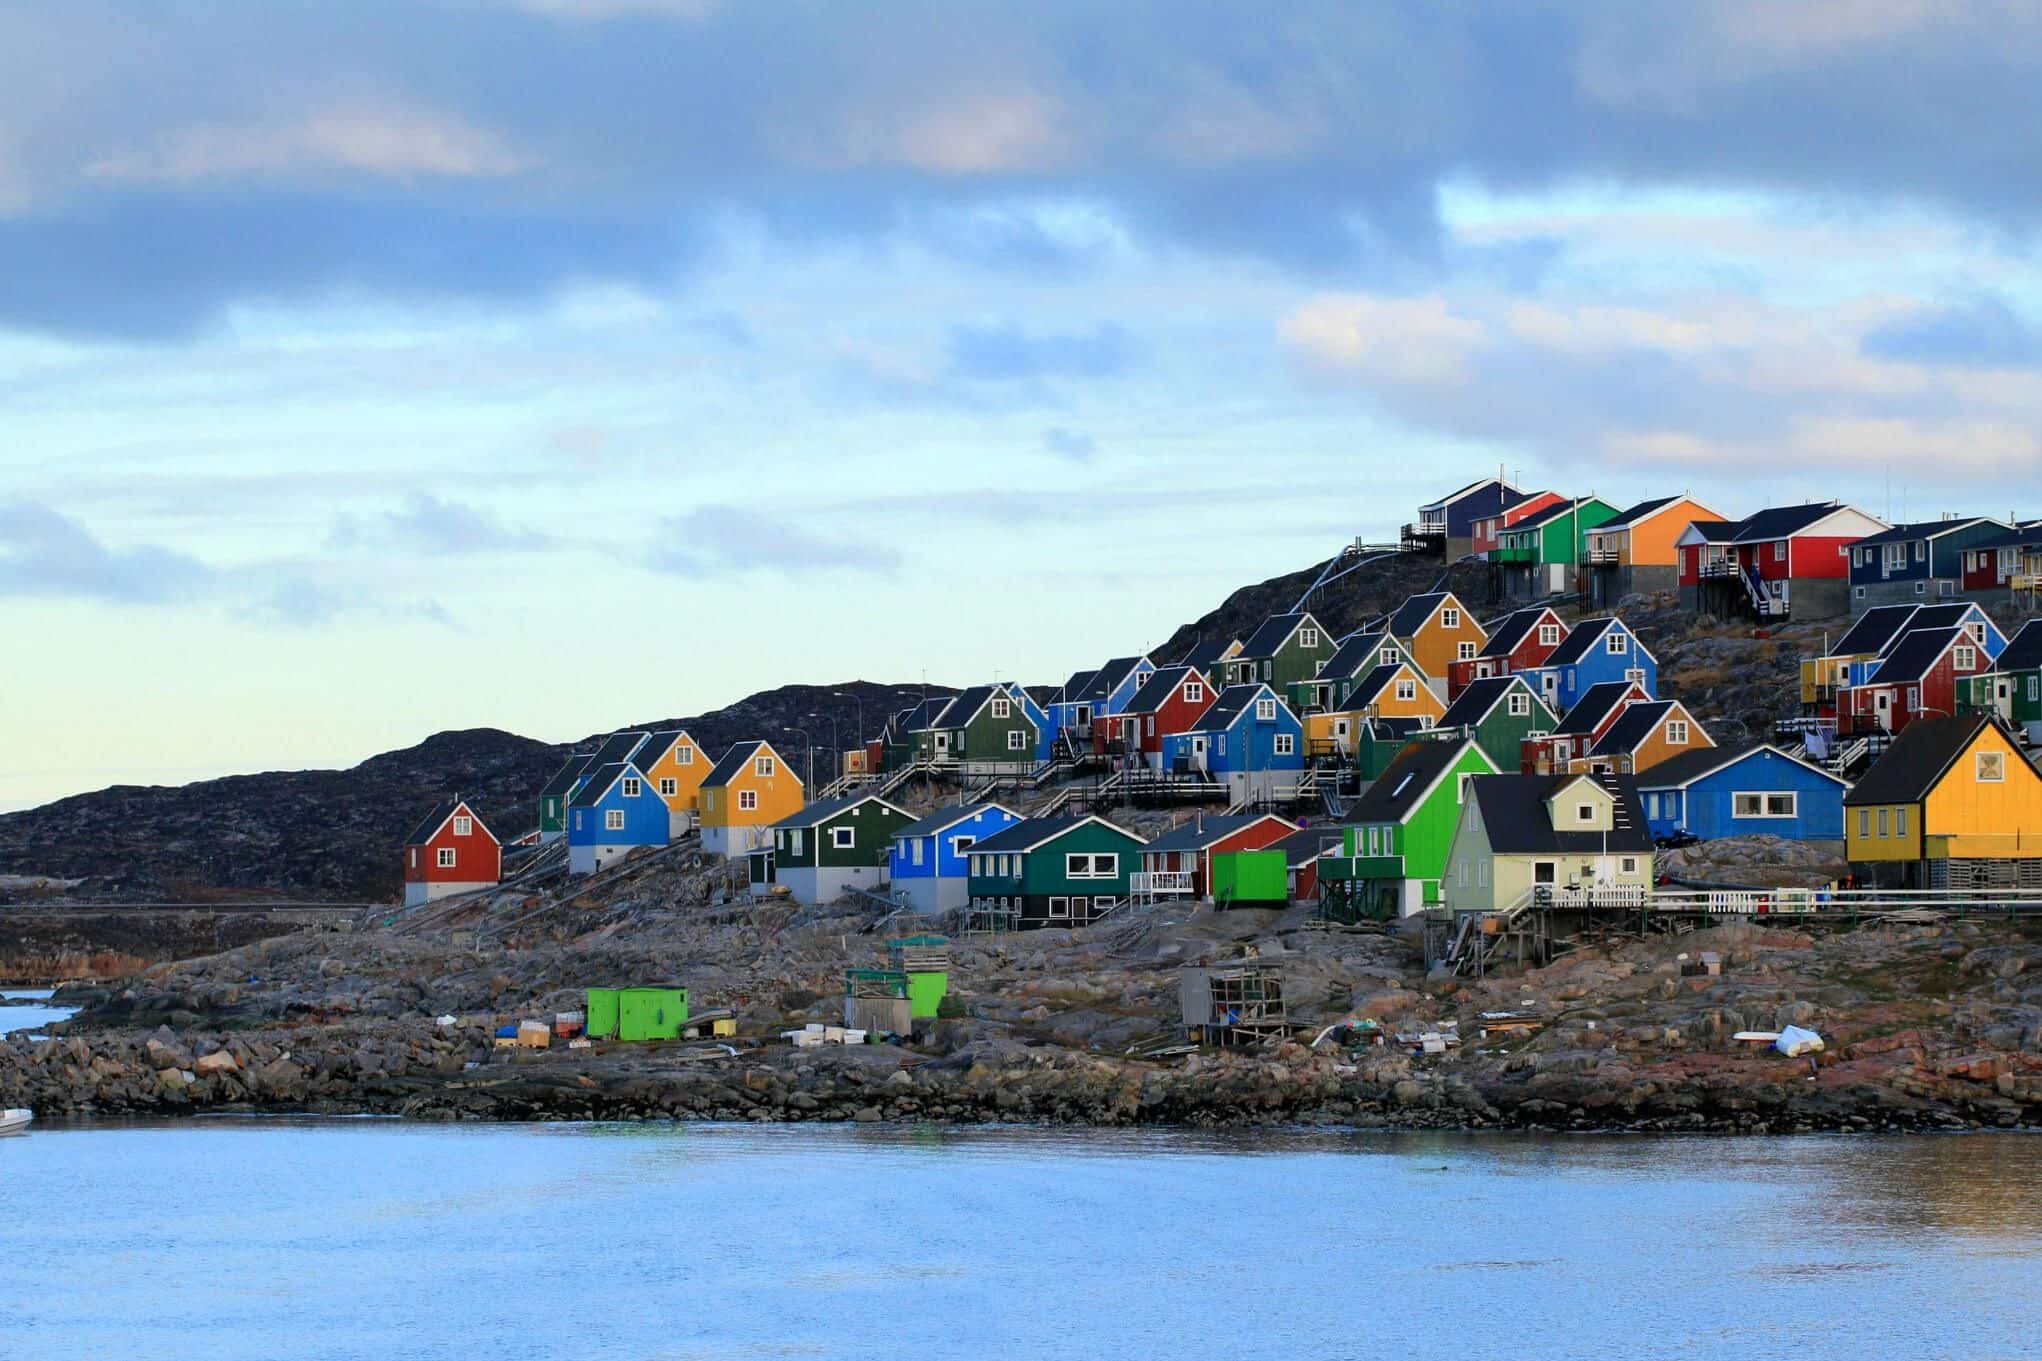 Colourful houses in Aasiaat. Photo by Magssannguaq Qujaukitsoq.